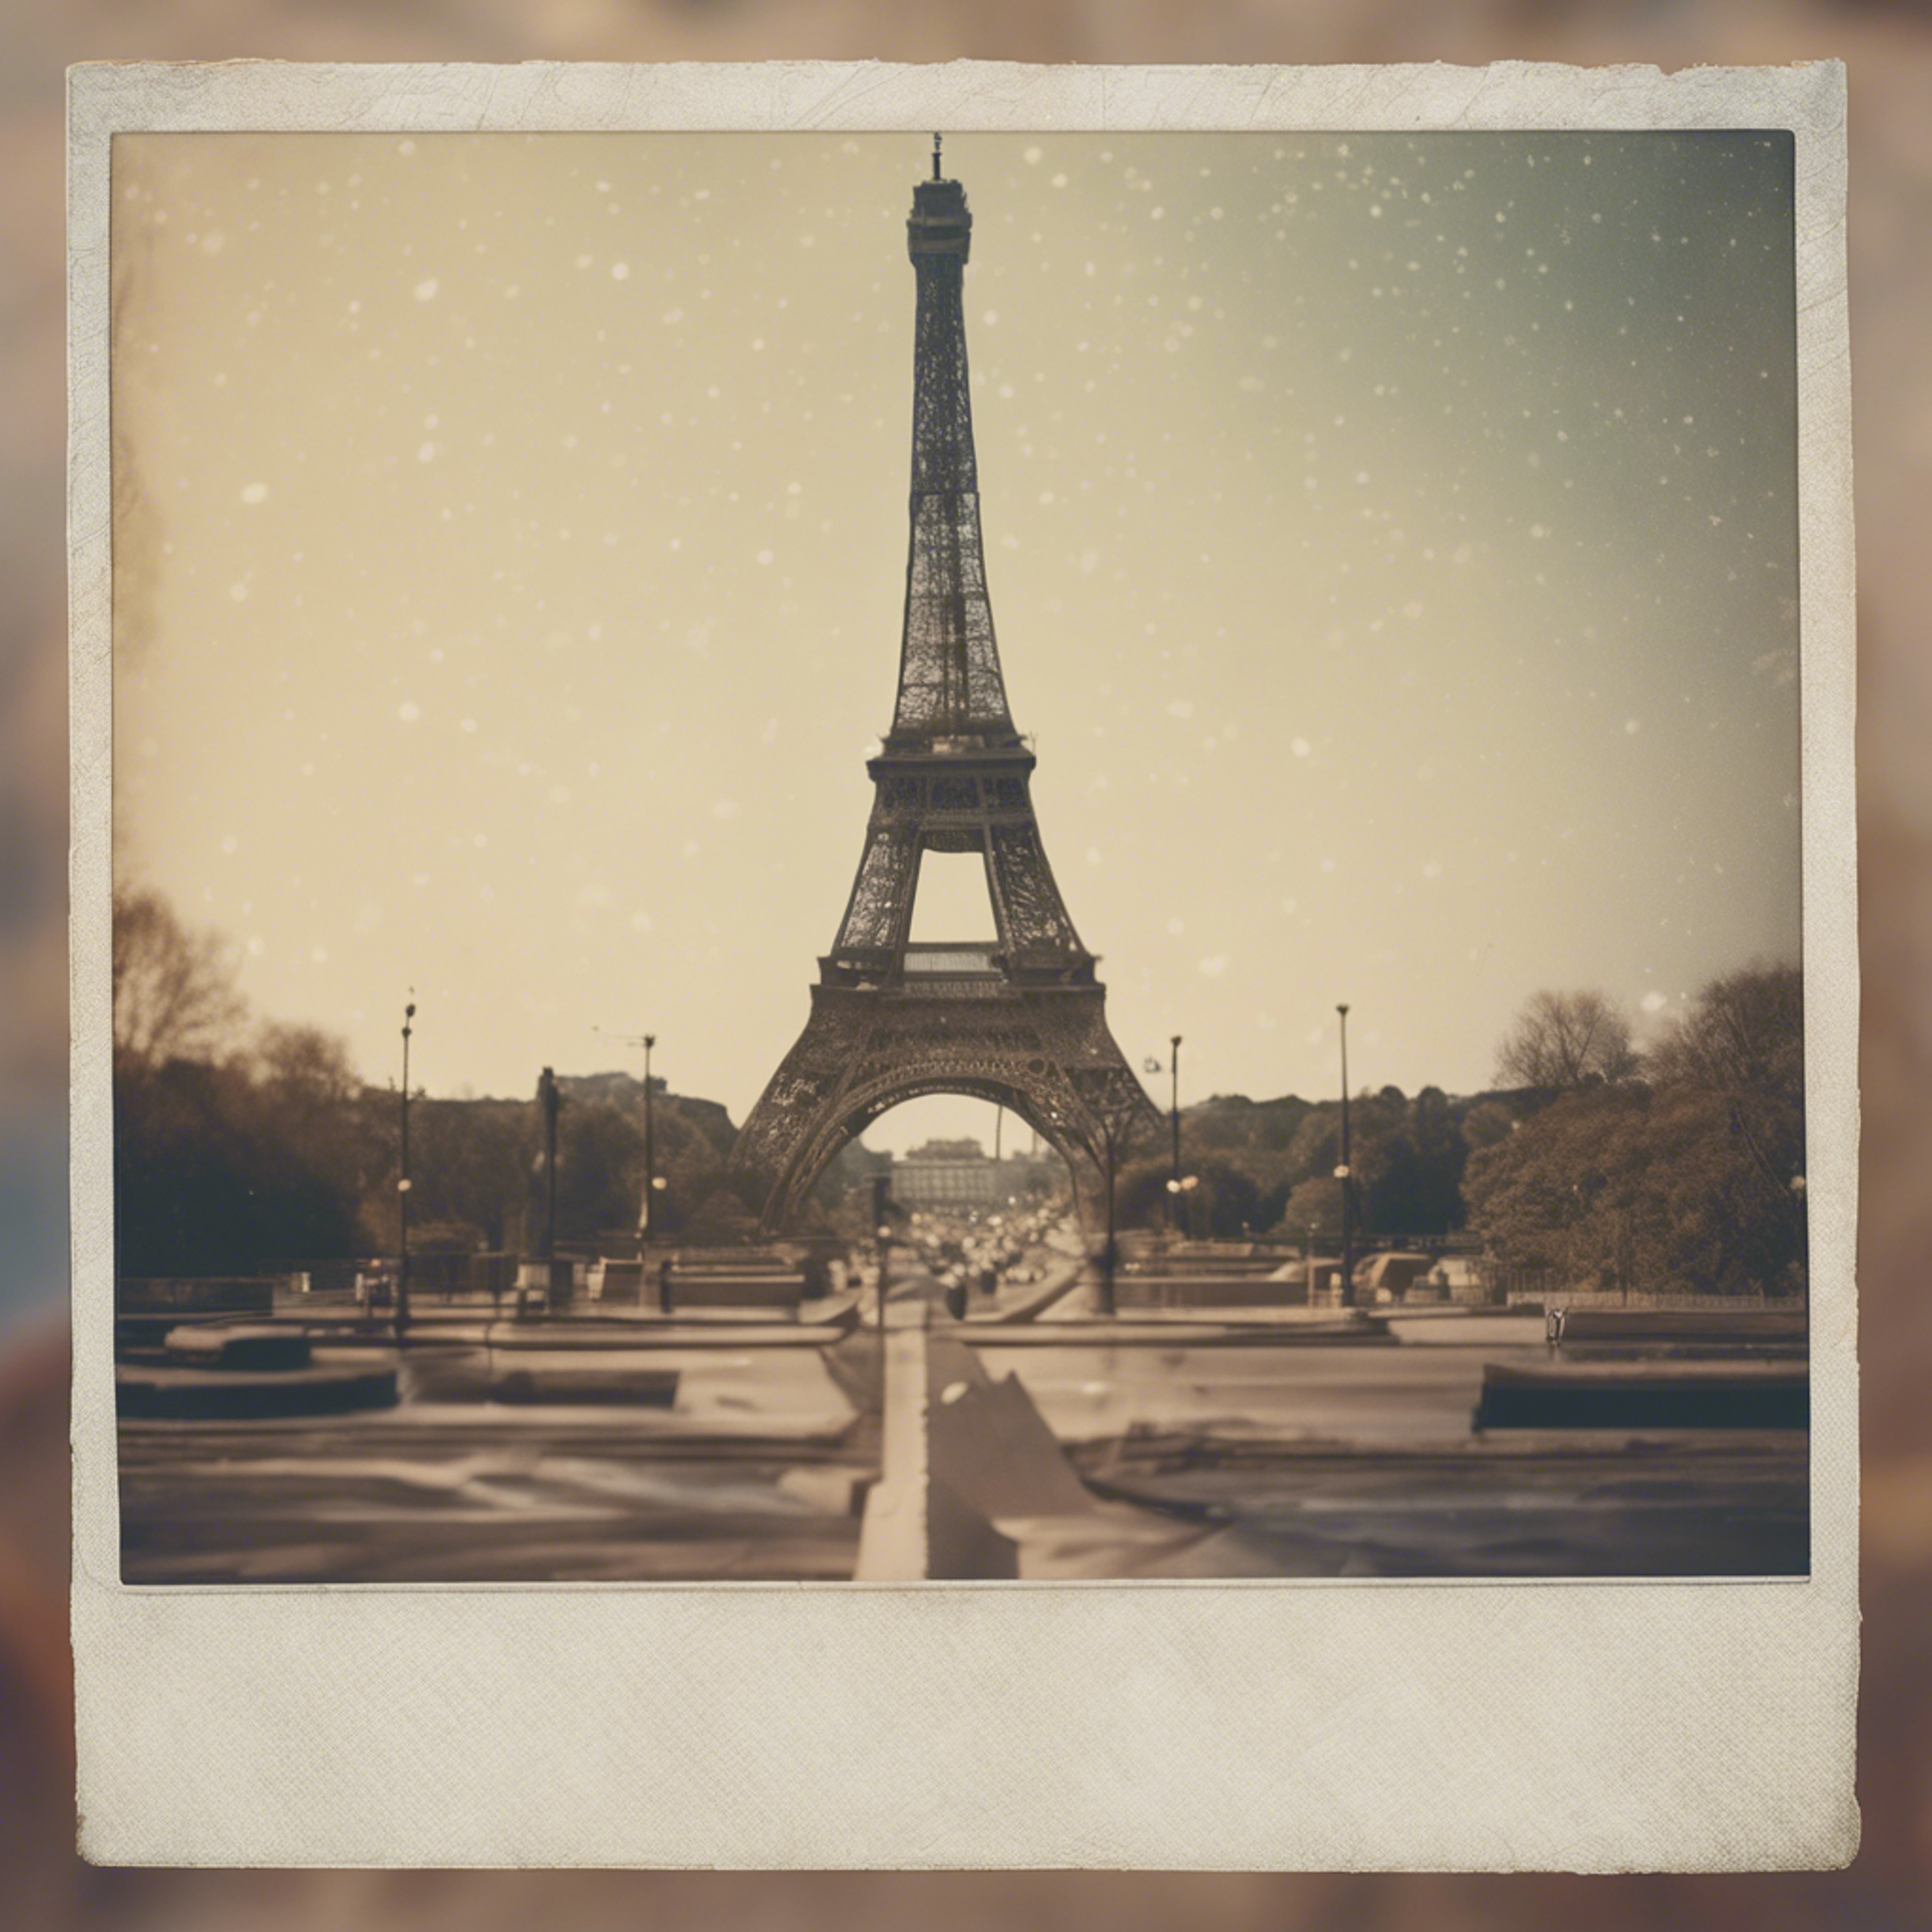 A faded beige Polaroid picture of an iconic landmark from the 70s. Ფონი[3ceb93f71d2c49b28cf4]